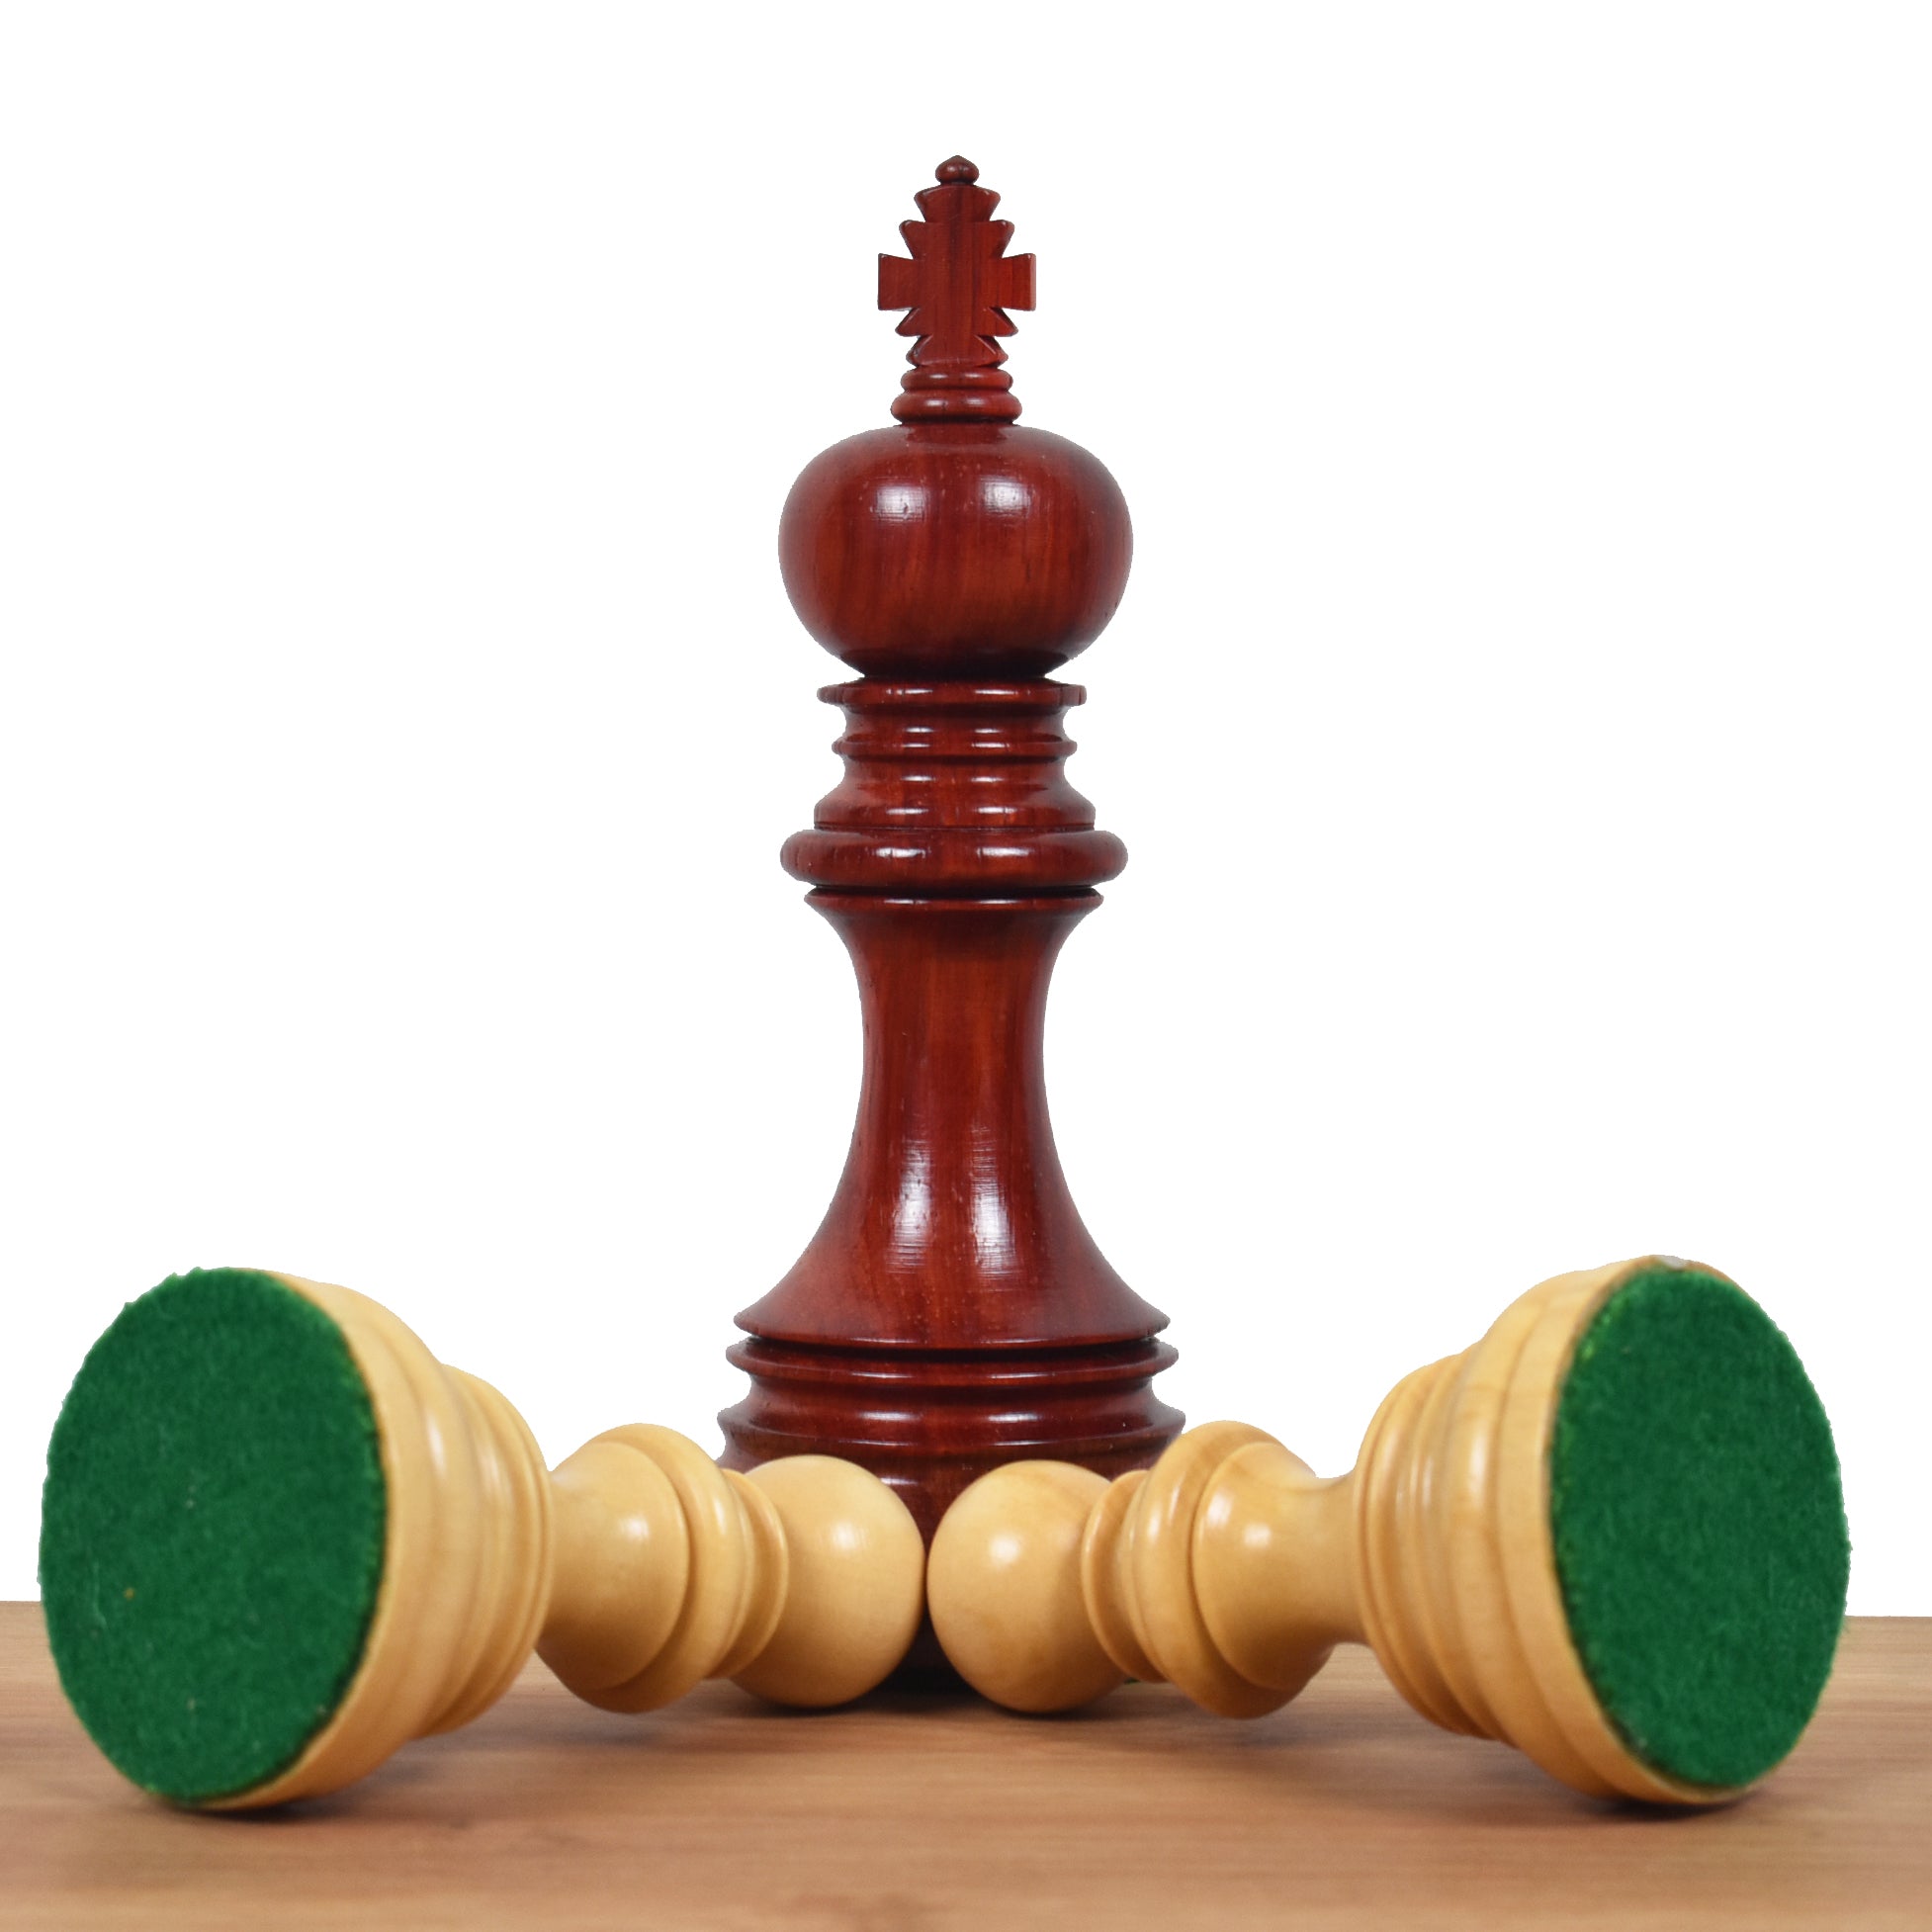 Combo of 4.1″ Stallion Staunton Luxury Bud Rose Wood Chess Pieces with 23" Chessboard and Storage Box